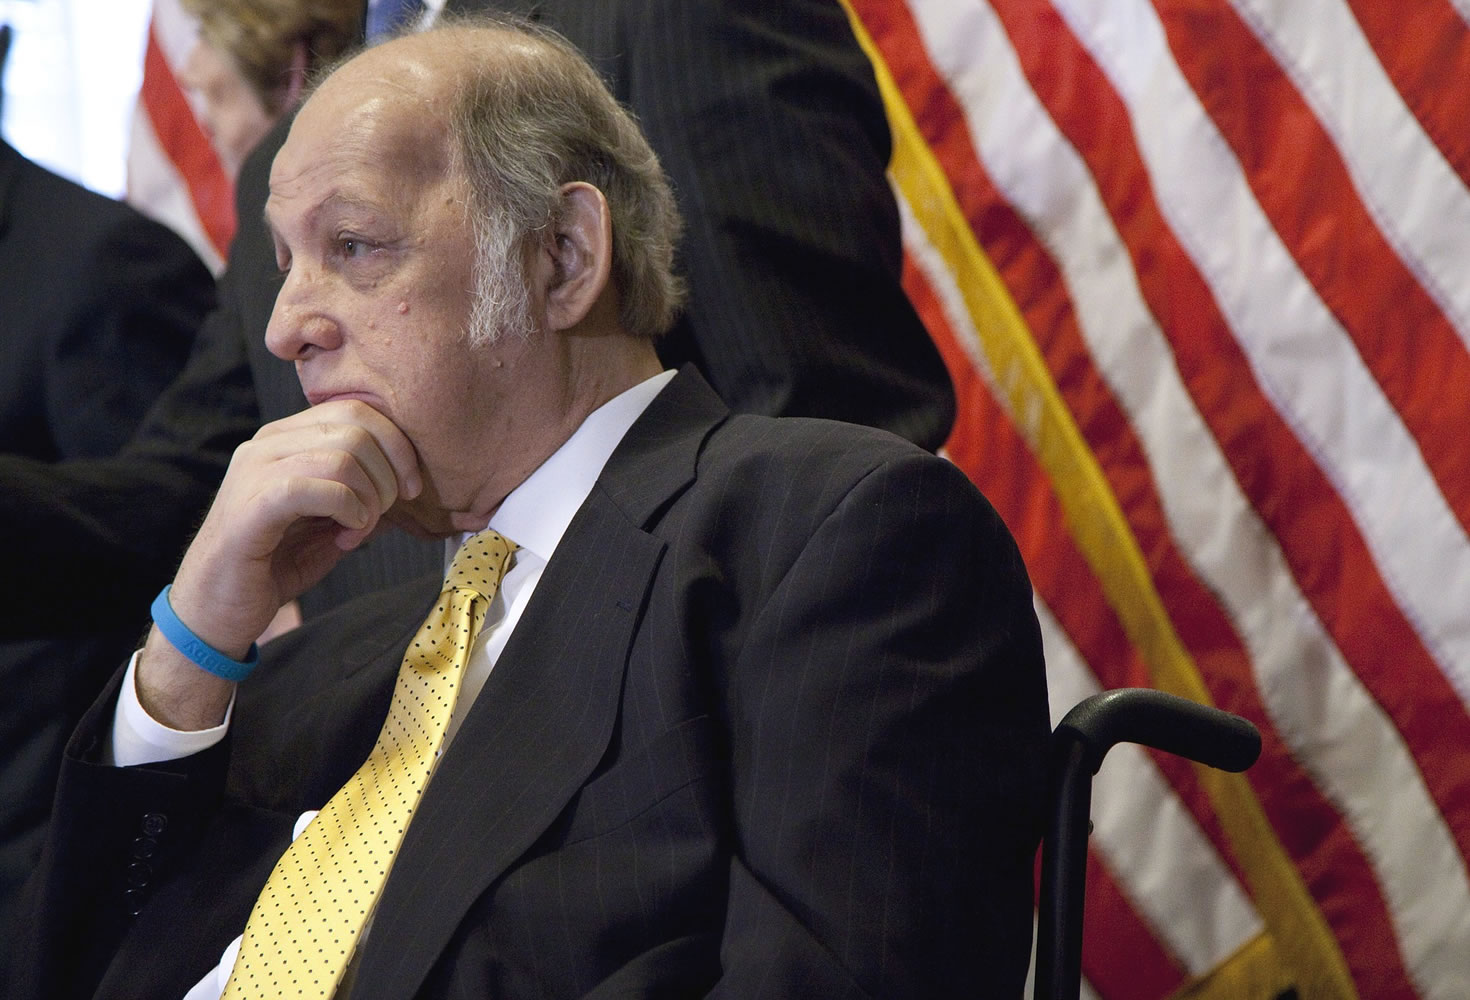 Former White House press secretary James Brady, who was left paralyzed in the Reagan assassination attempt in 1981, attends a news conference on Capitol Hill in Washington marking the 30th anniversary of the shooting on March 30, 2011.